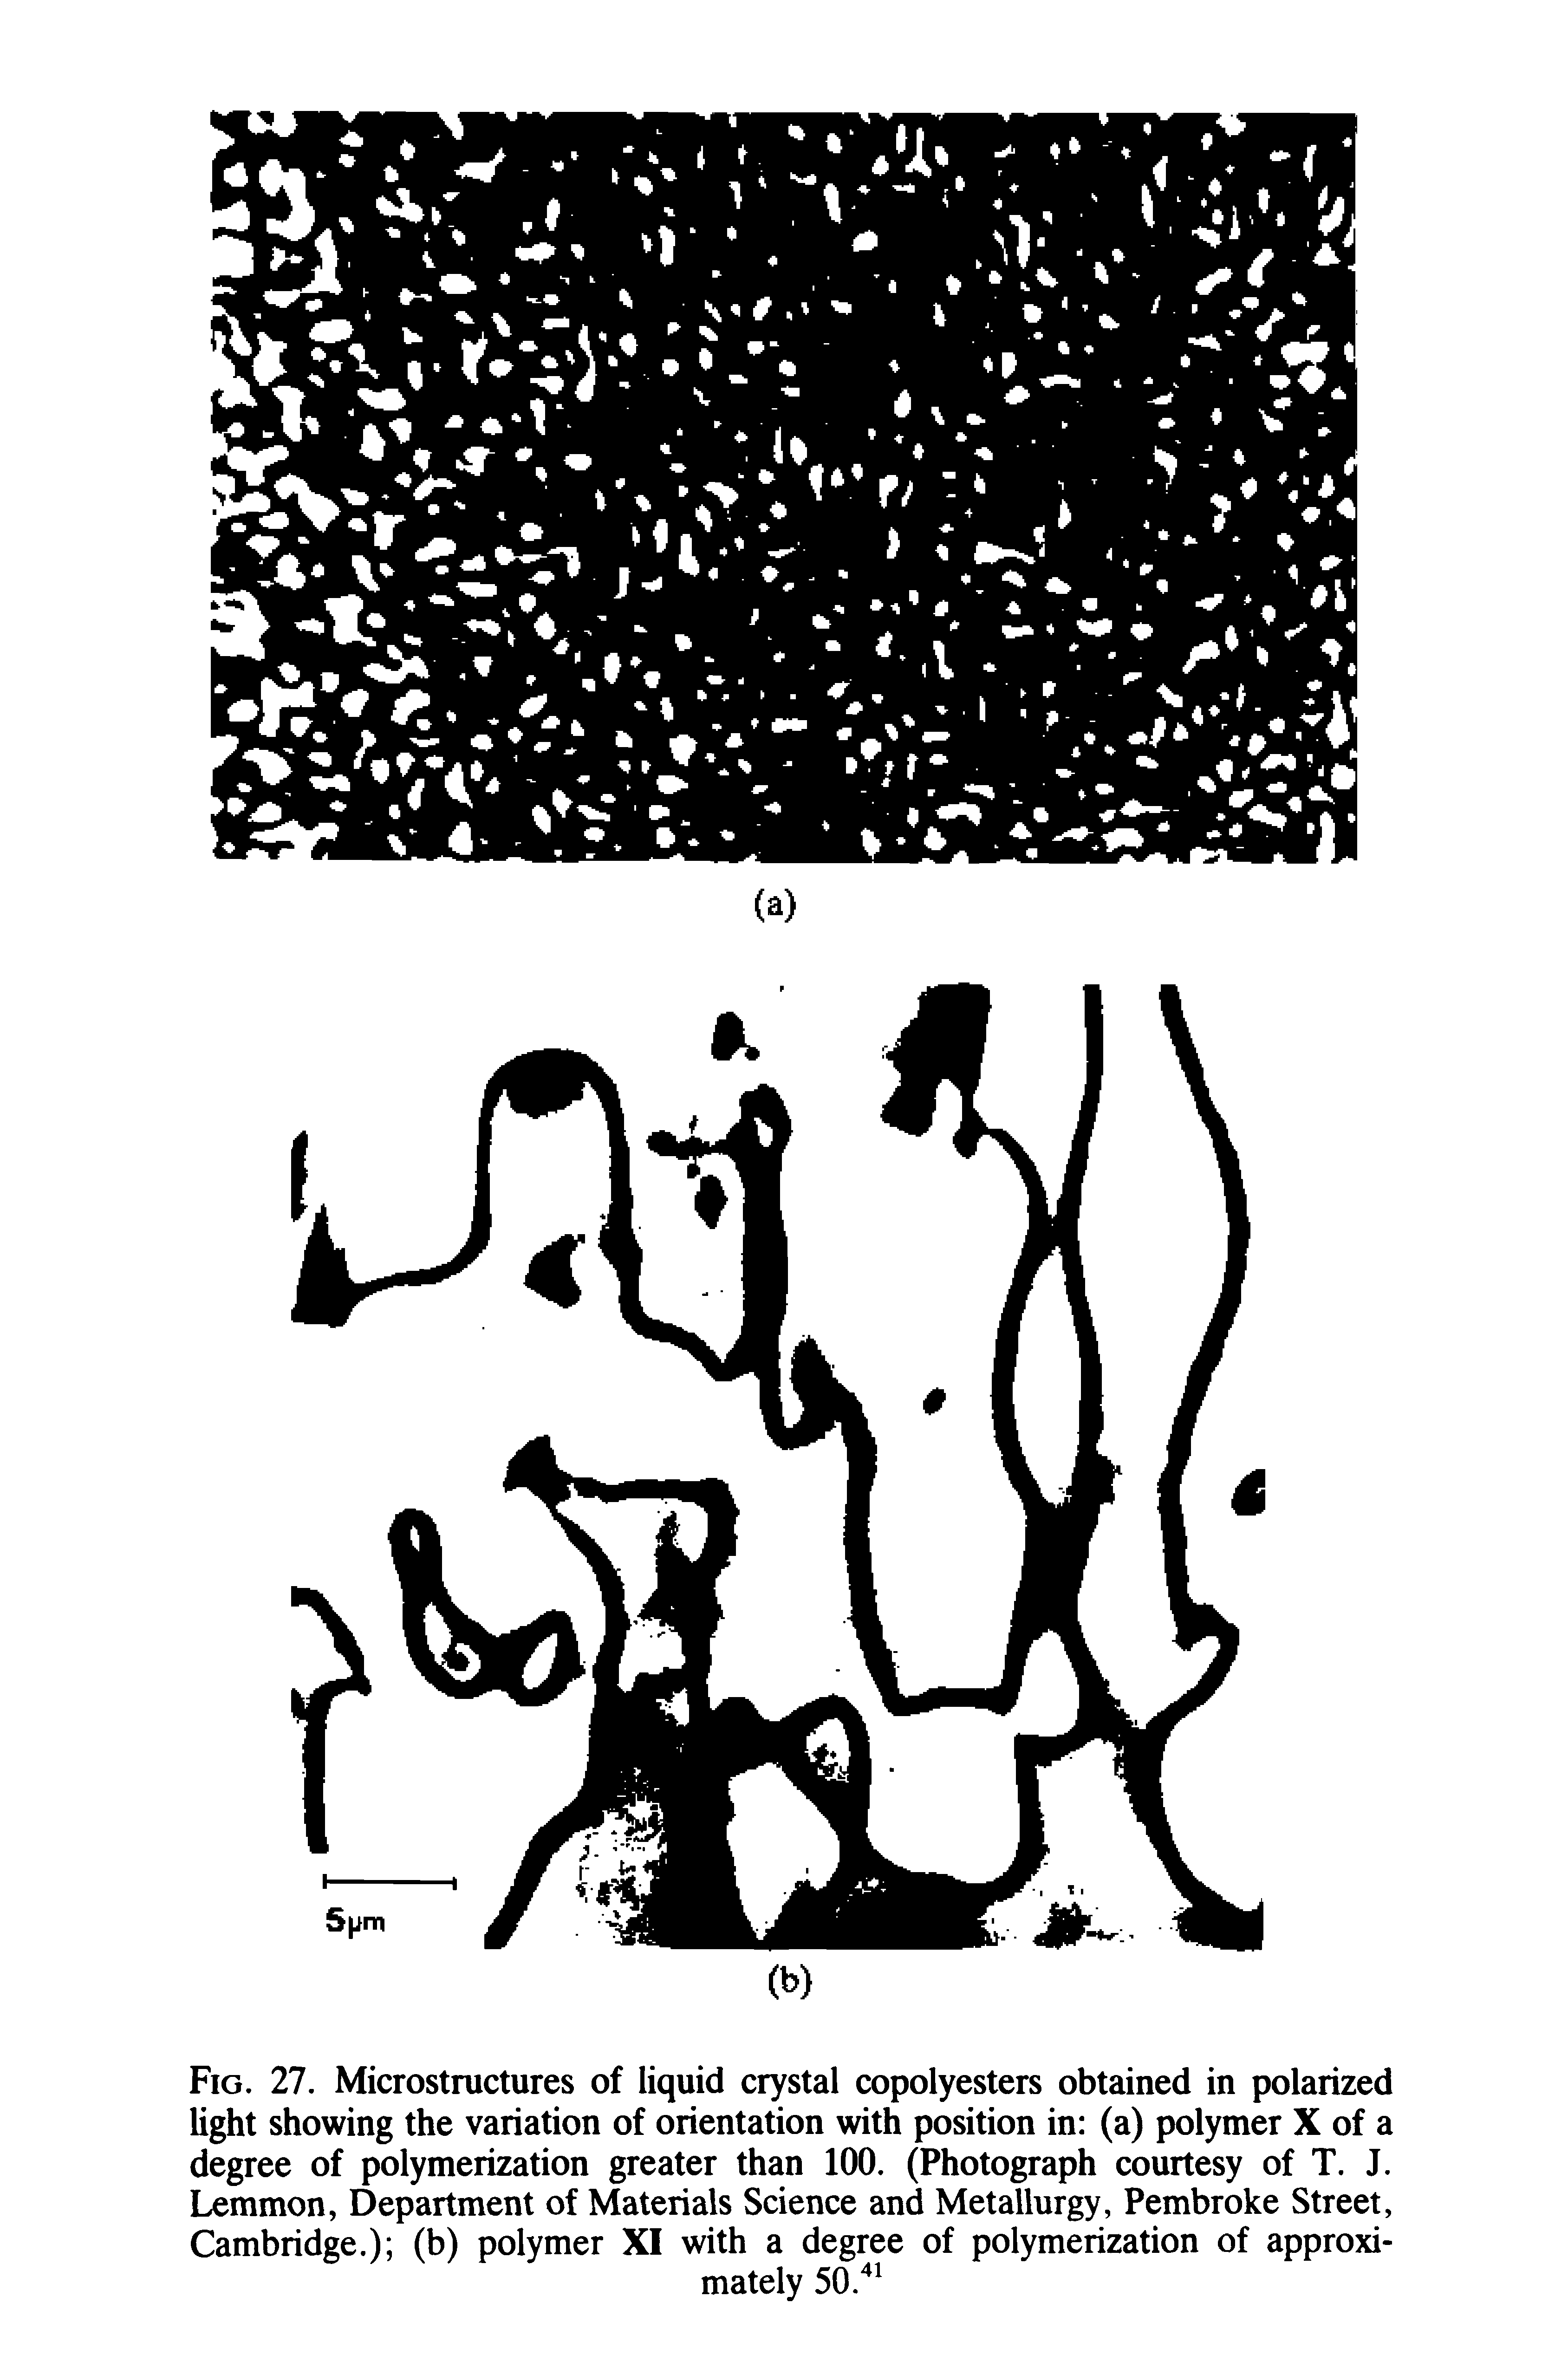 Fig. 27. Microstructures of liquid crystal copolyesters obtained in polarized light showing the variation of orientation with position in (a) polymer X of a degree of polymerization greater than 100. (Photograph courtesy of T. J. Lemmon, Department of Materials Science and Metallurgy, Pembroke Street, Cambridge.) (b) polymer XI with a degree of polymerization of approximately 50. ...